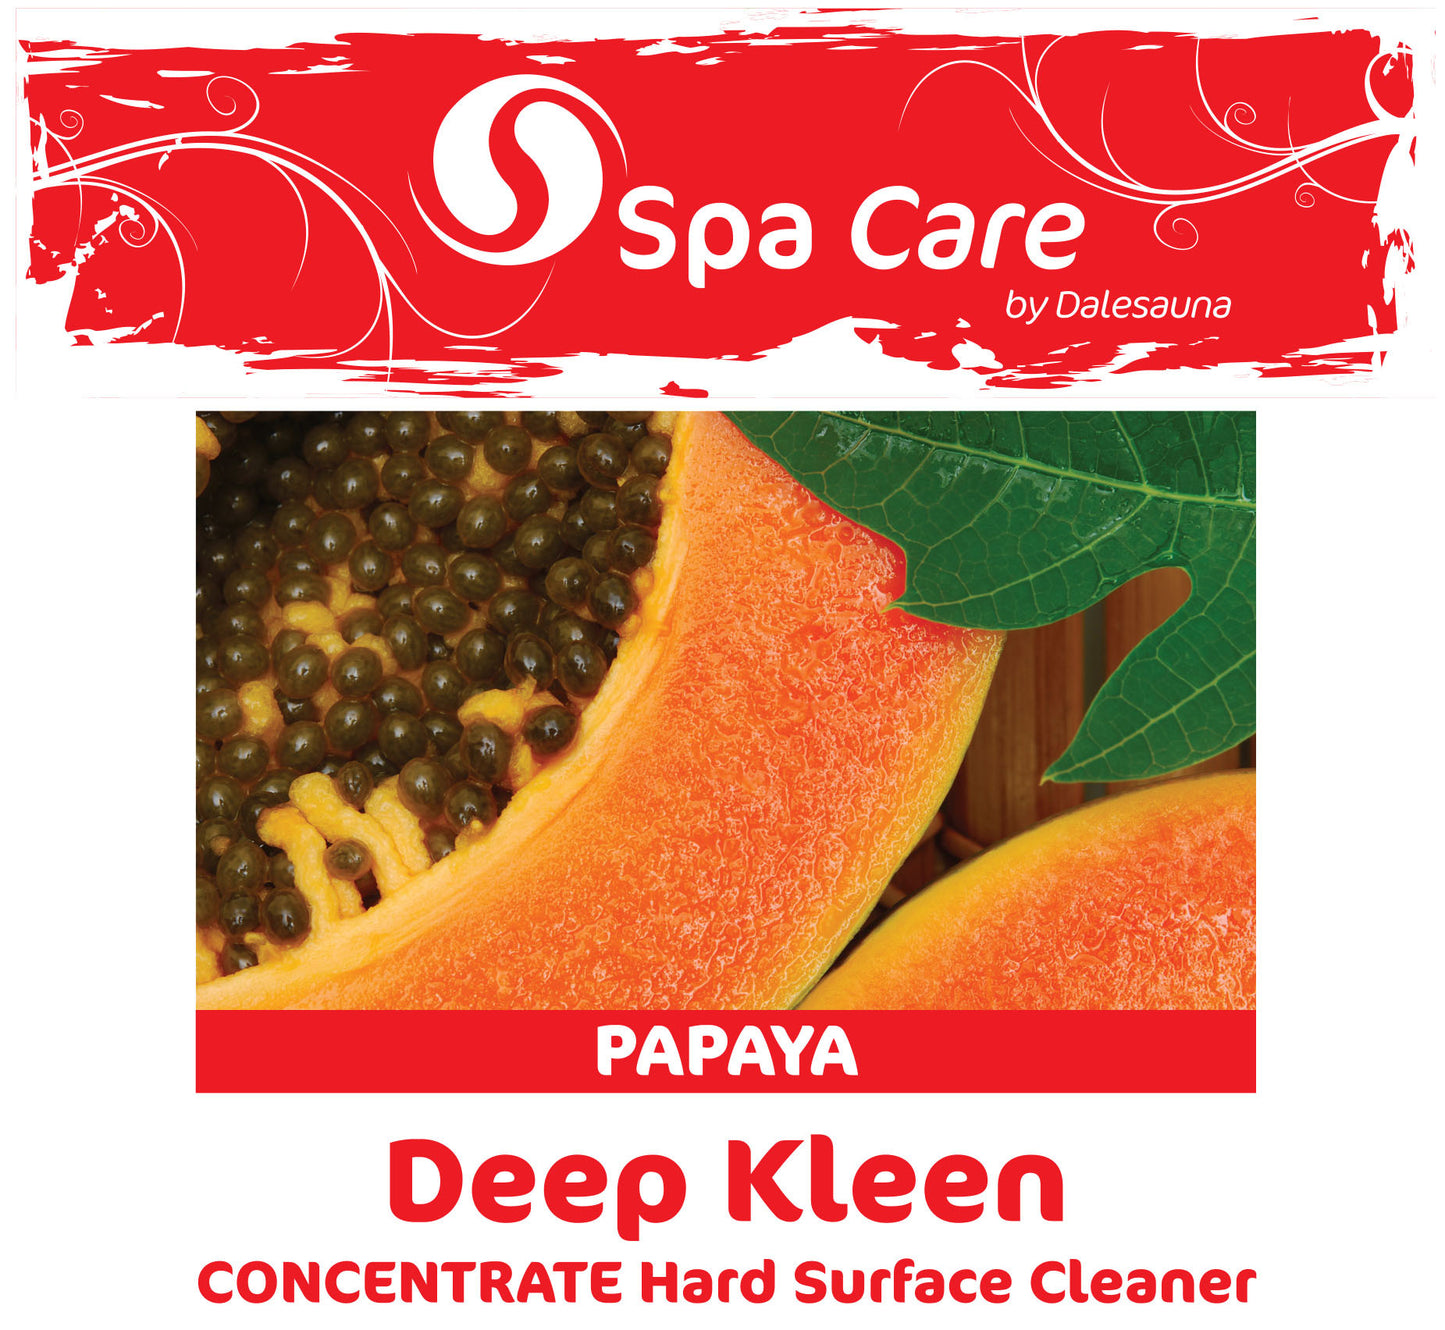 Deep Kleen Hard Surface Cleaner "Papaya" Concentrate 2 x 5ltr (with 30ml dosage dispenser)